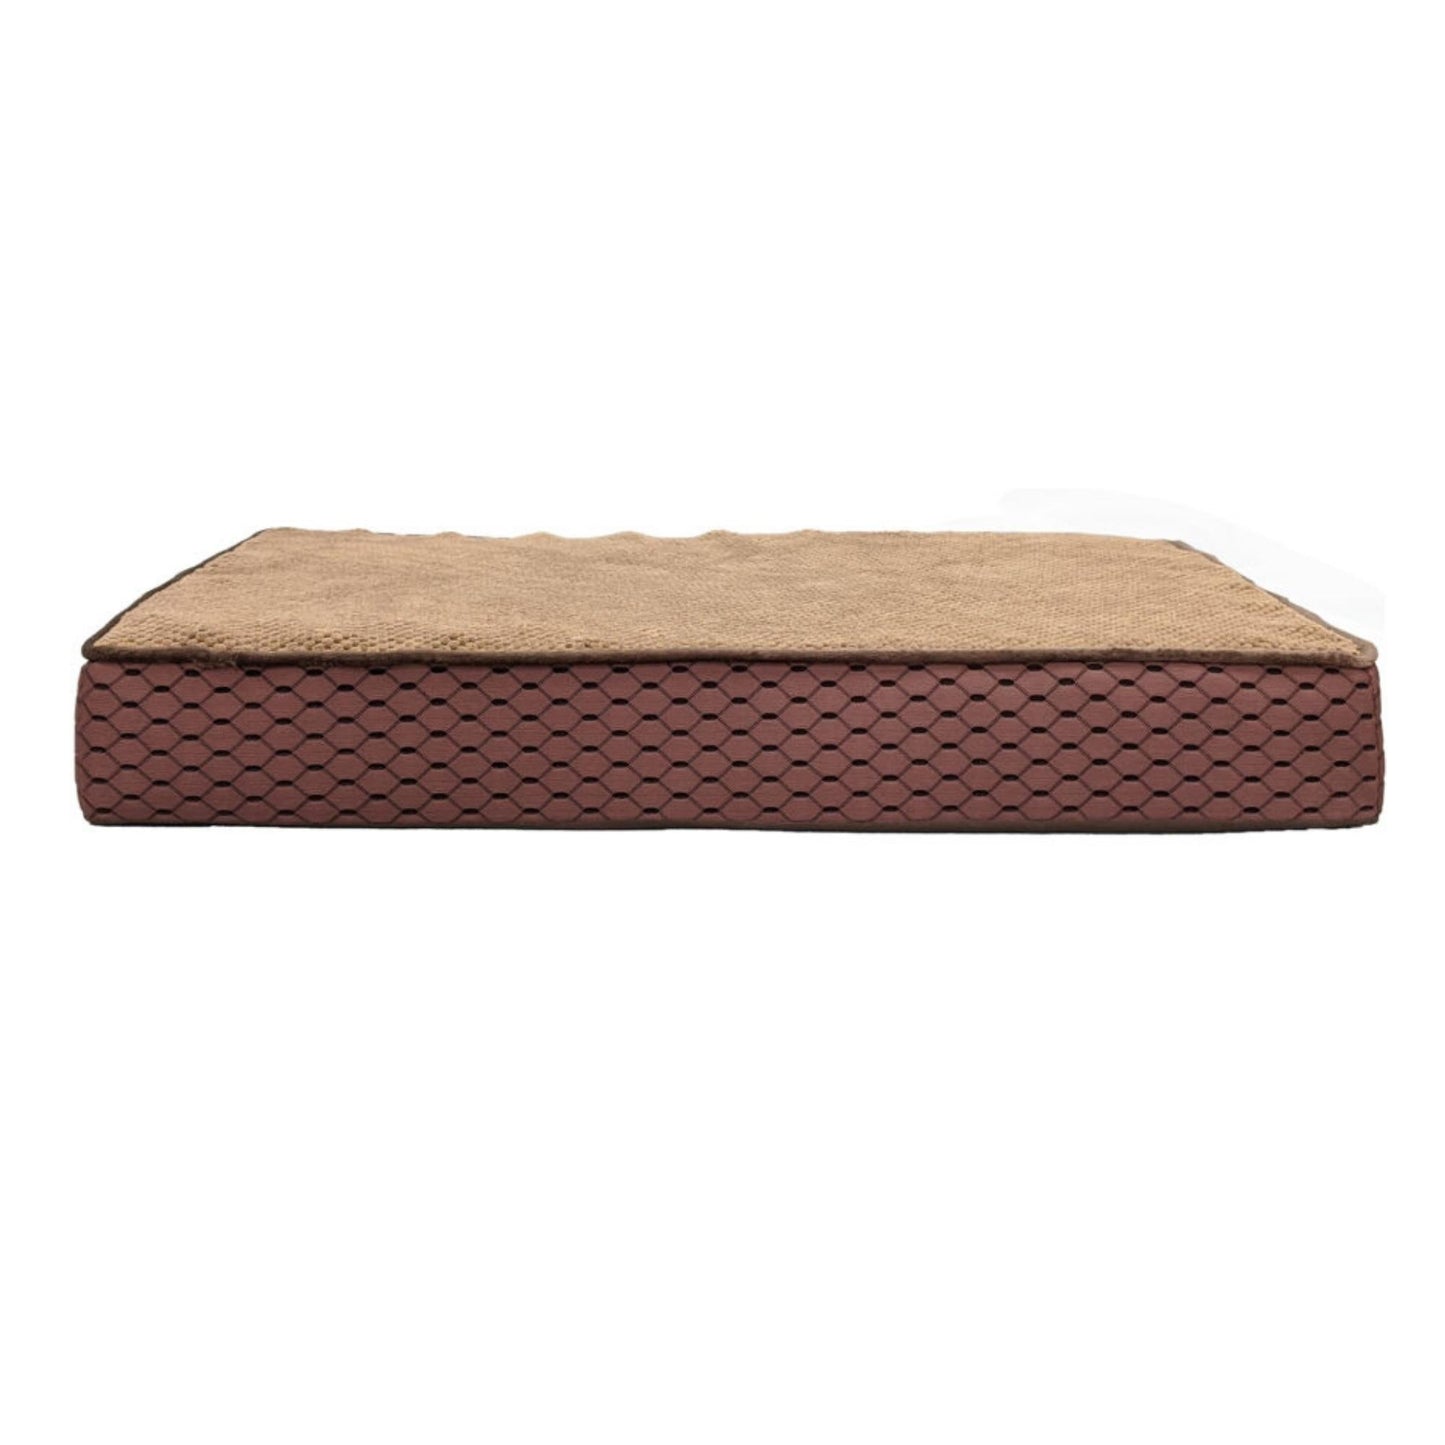 Ethical Pet Sleep Zone Bamboo Bed 40" Brown